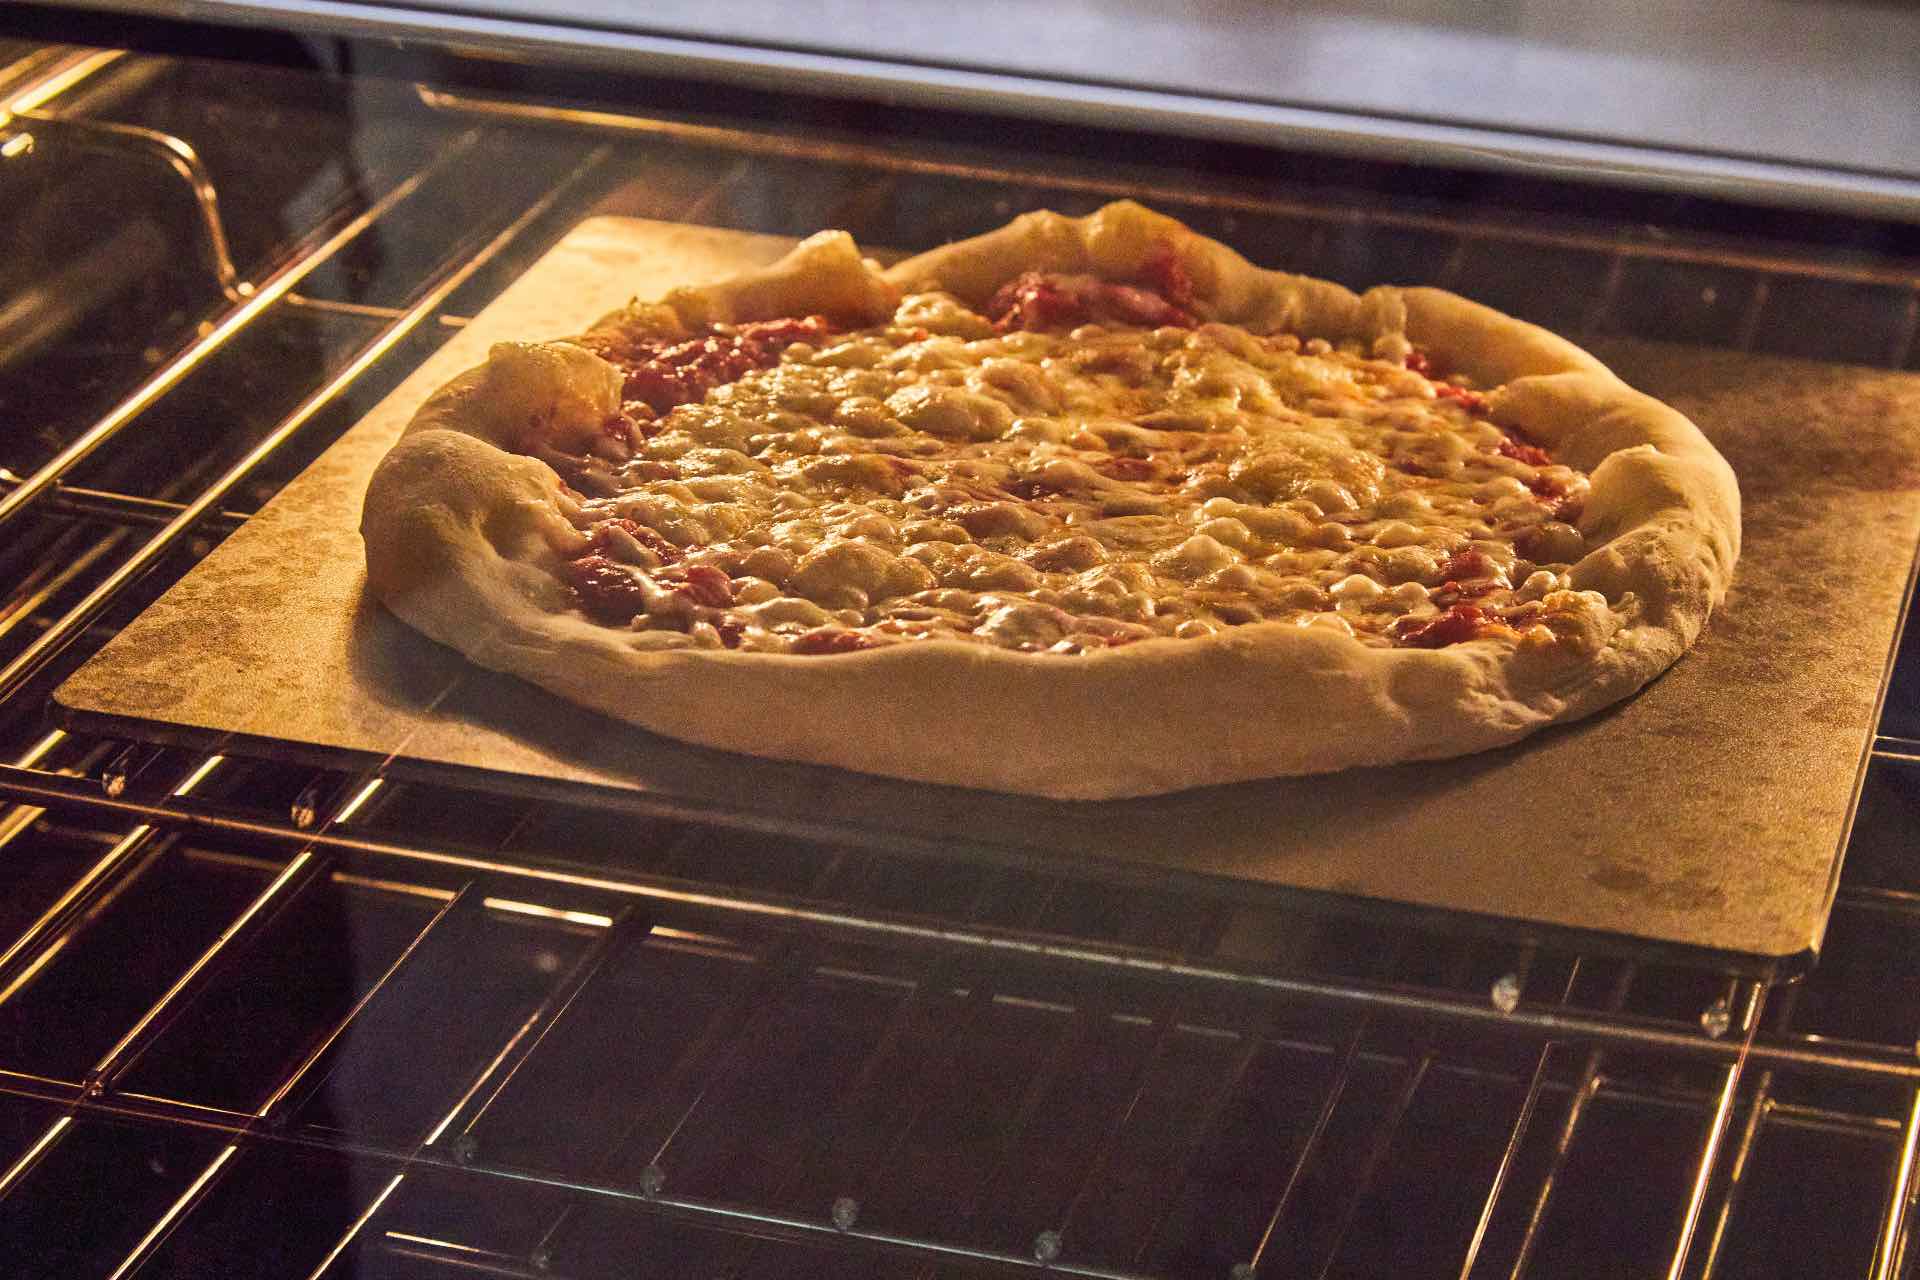 NY style made in home oven on baking steel : r/Pizza